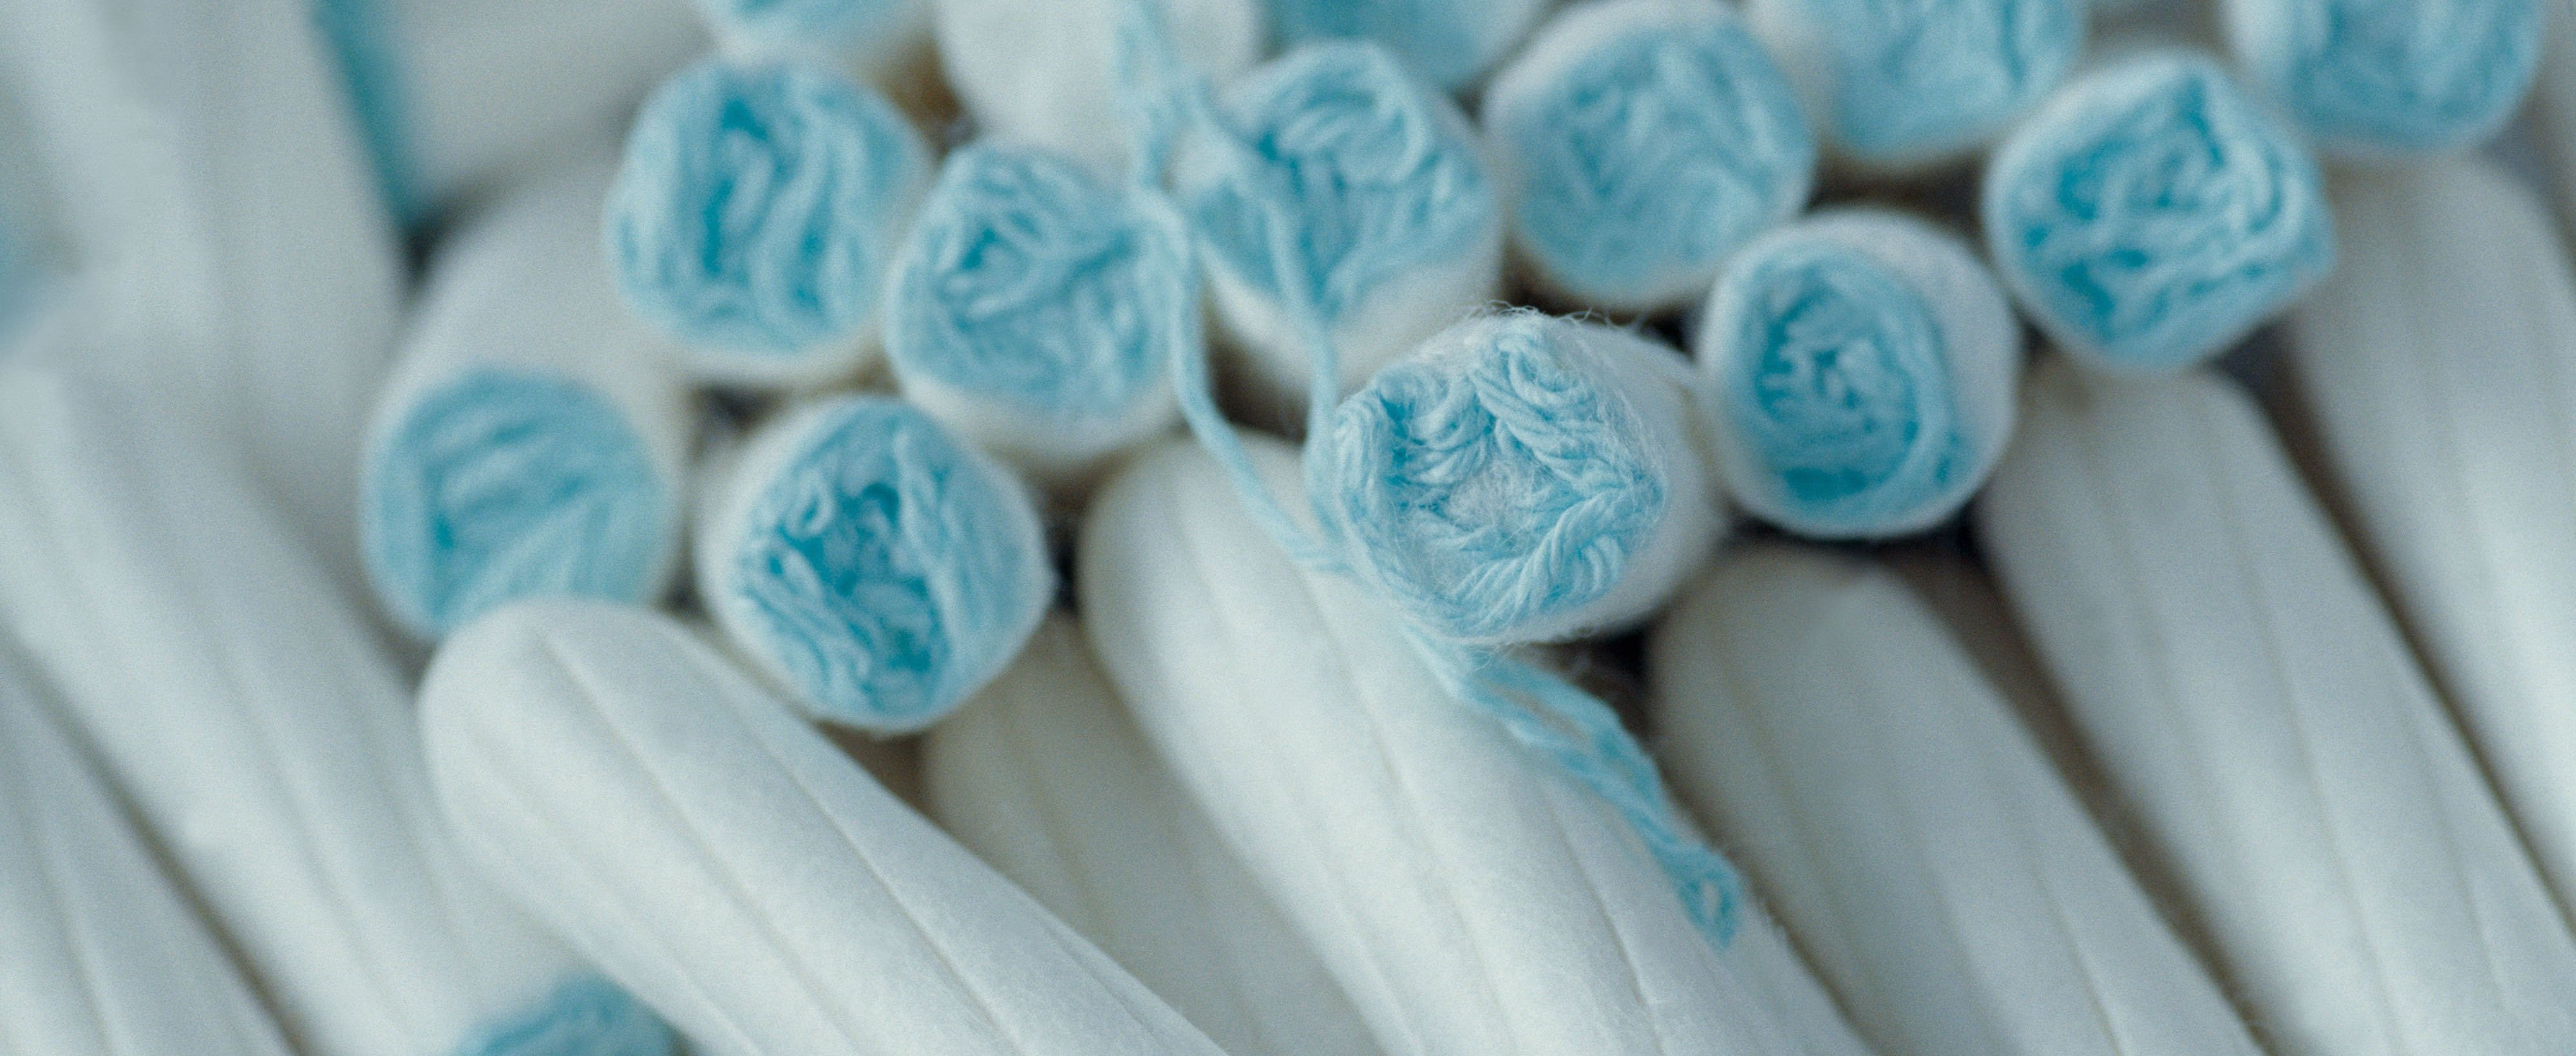 Are tampons really a luxury?